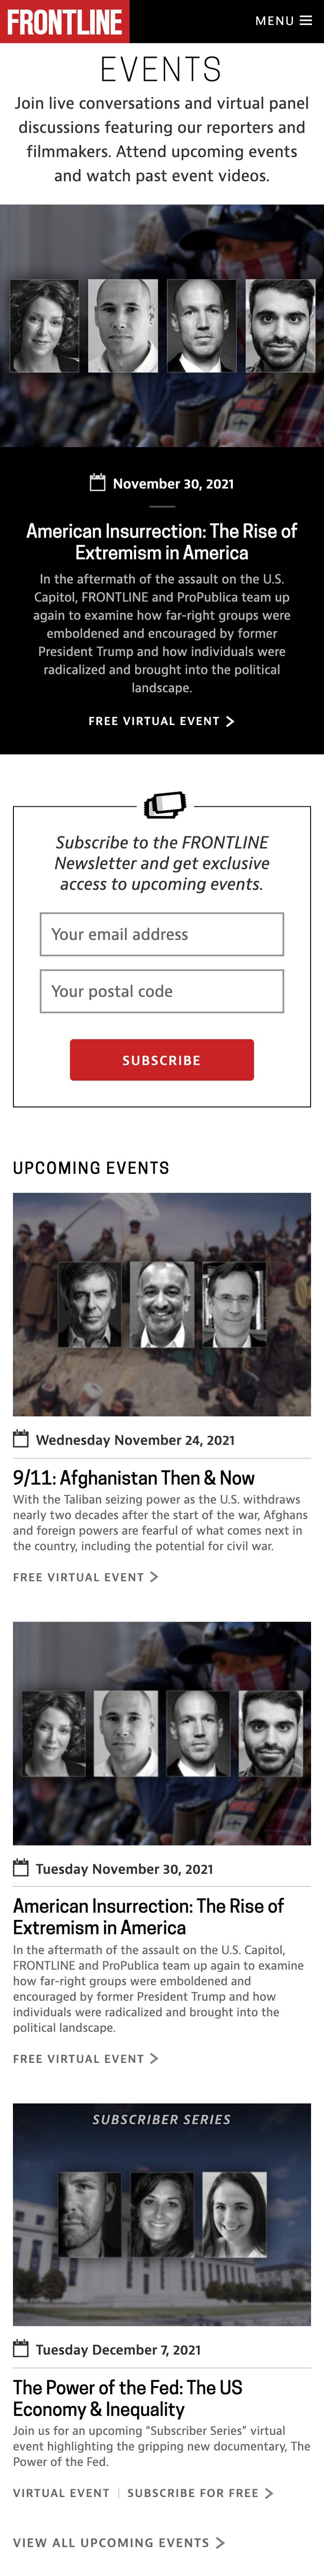 A mobile layout of the FRONTLINE events section page.